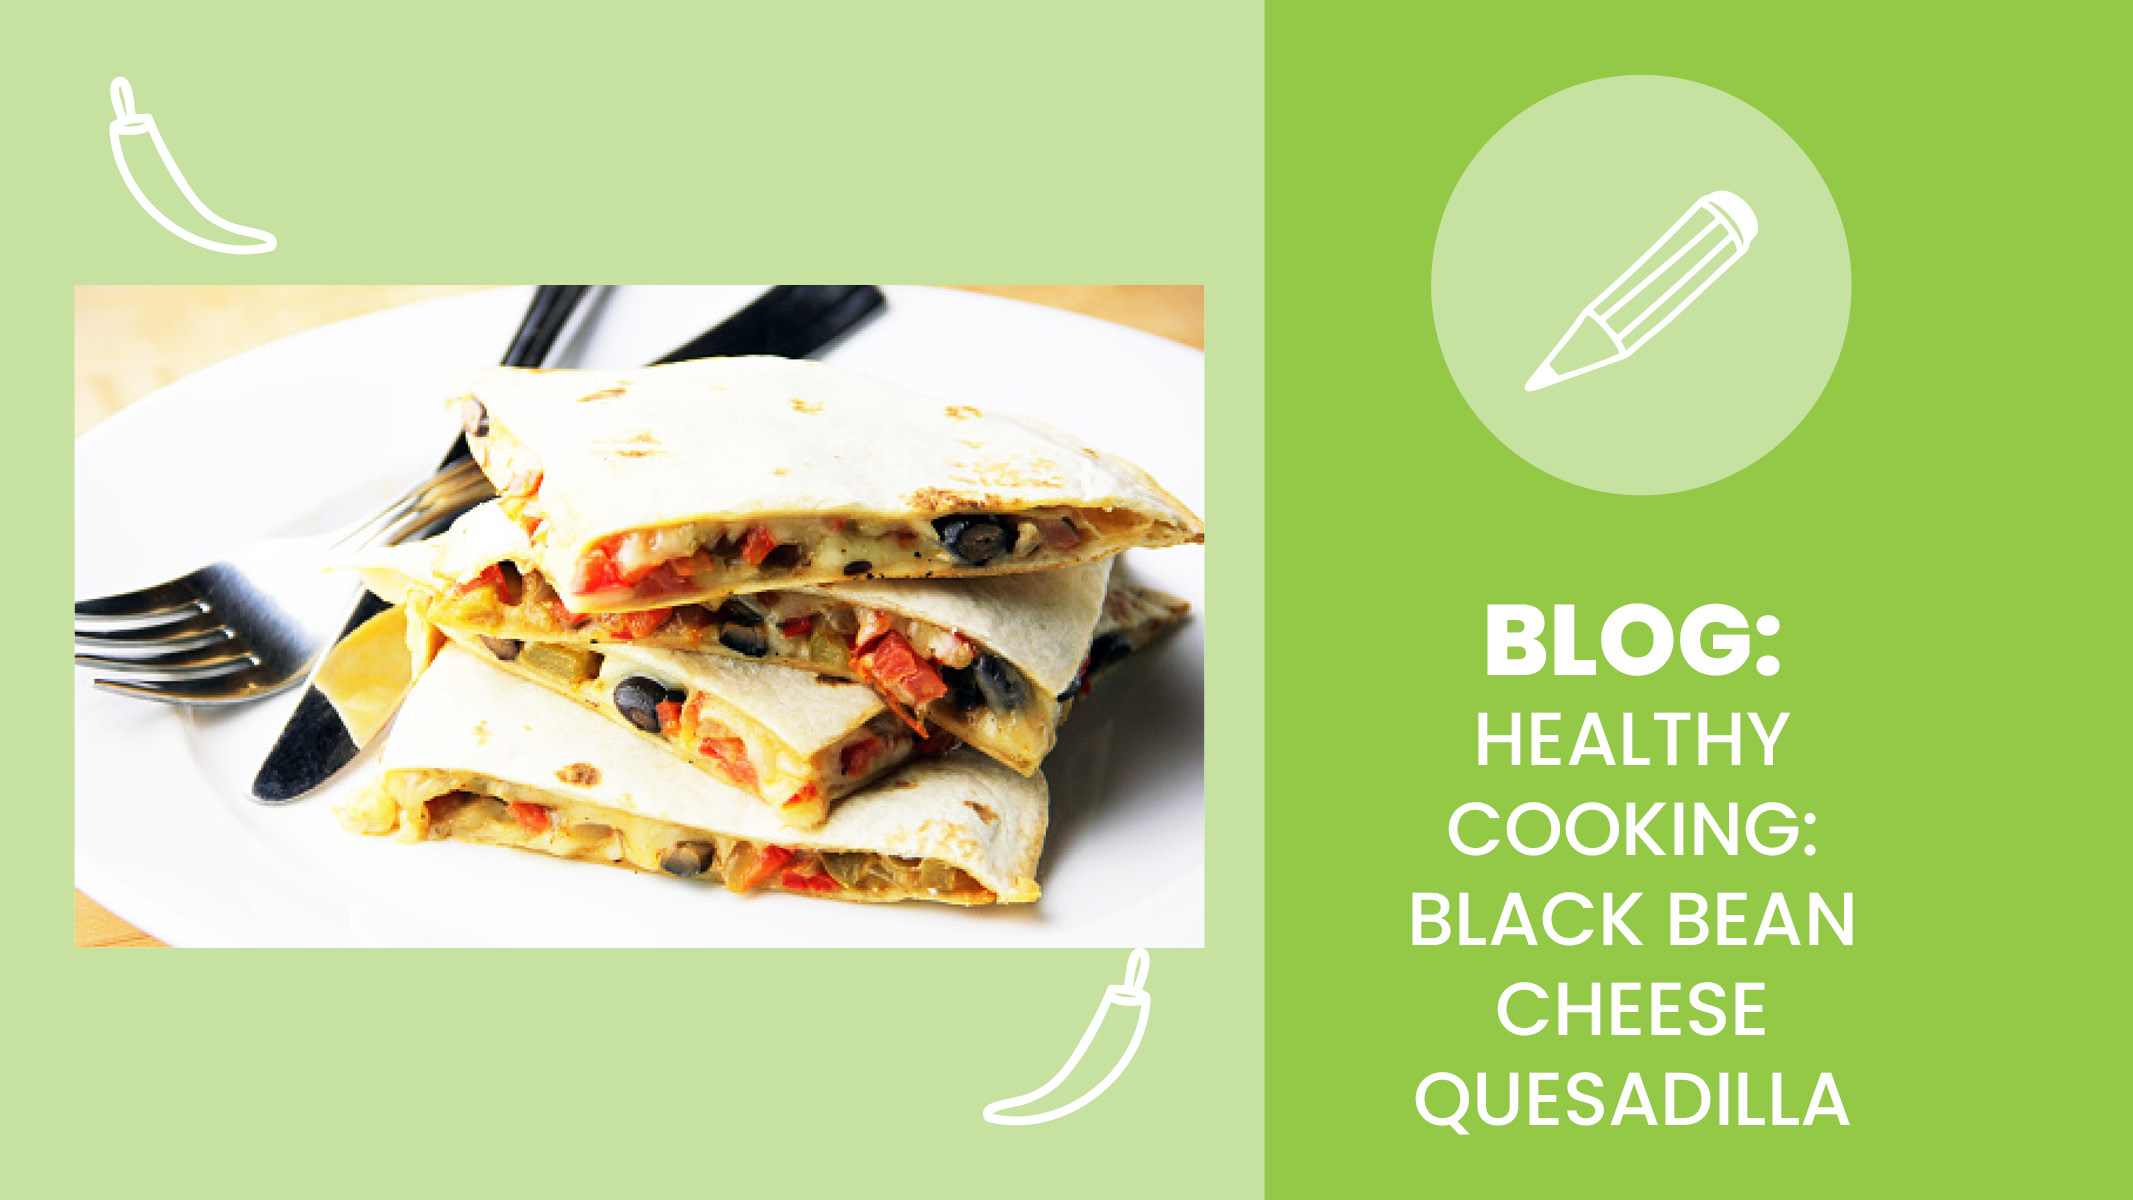 Healthy quesadilla meal made with black beans and cheese